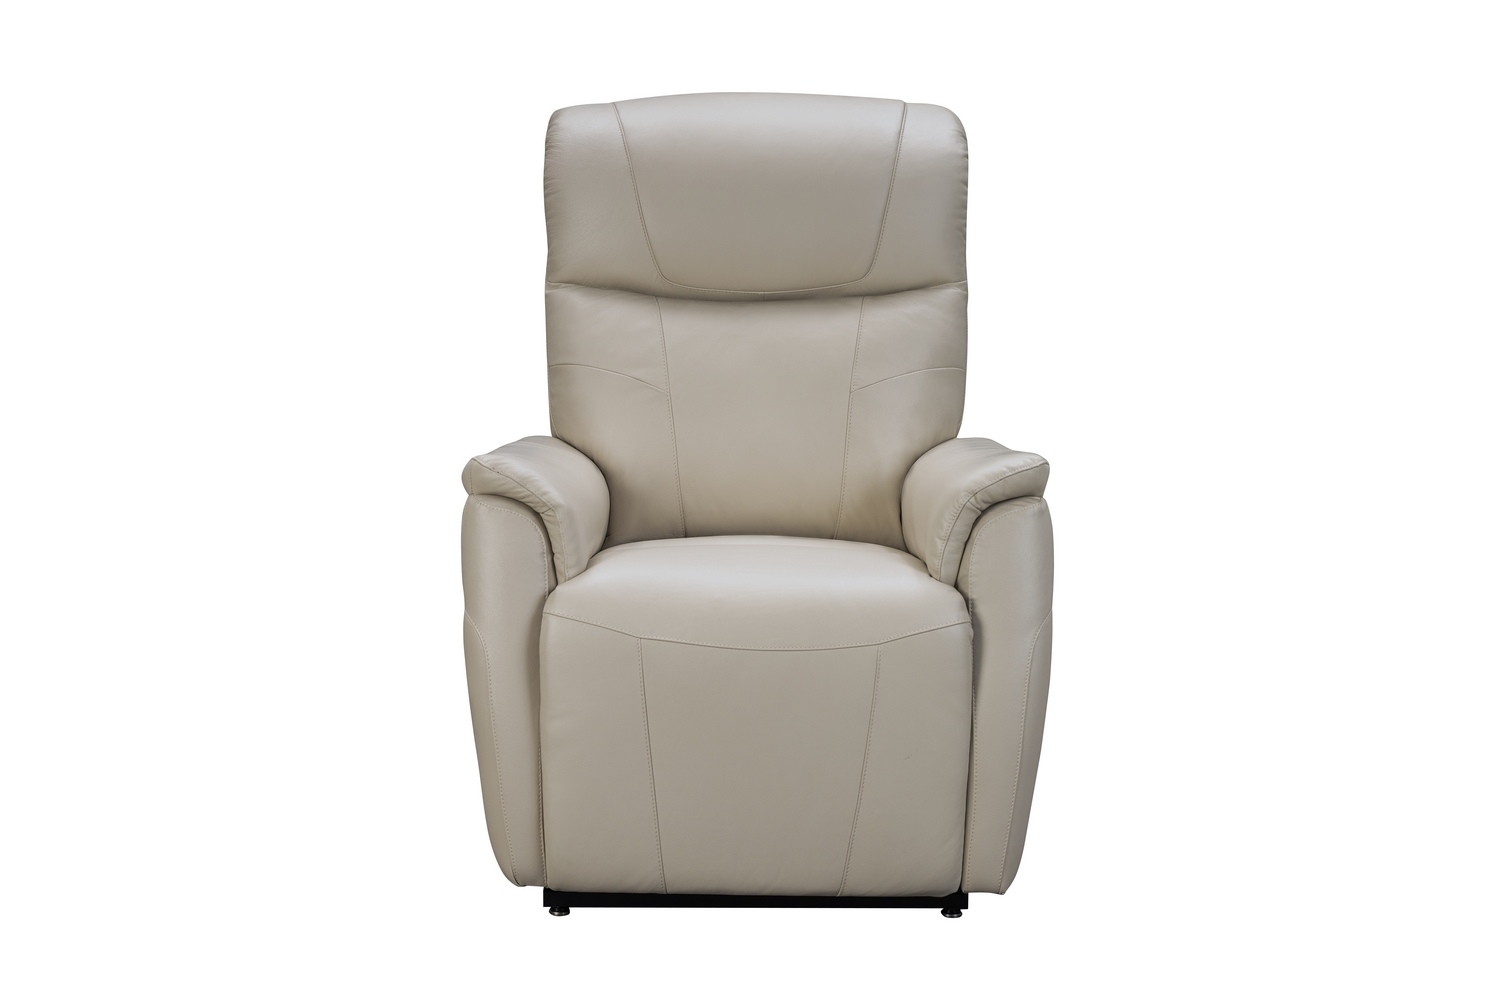 Barcalounger Leighton Lift Chair Recliner Chair with Power Head Rest, Power Lumbar and Lay Flat Mechanism - Laurel Cream/Leather Match